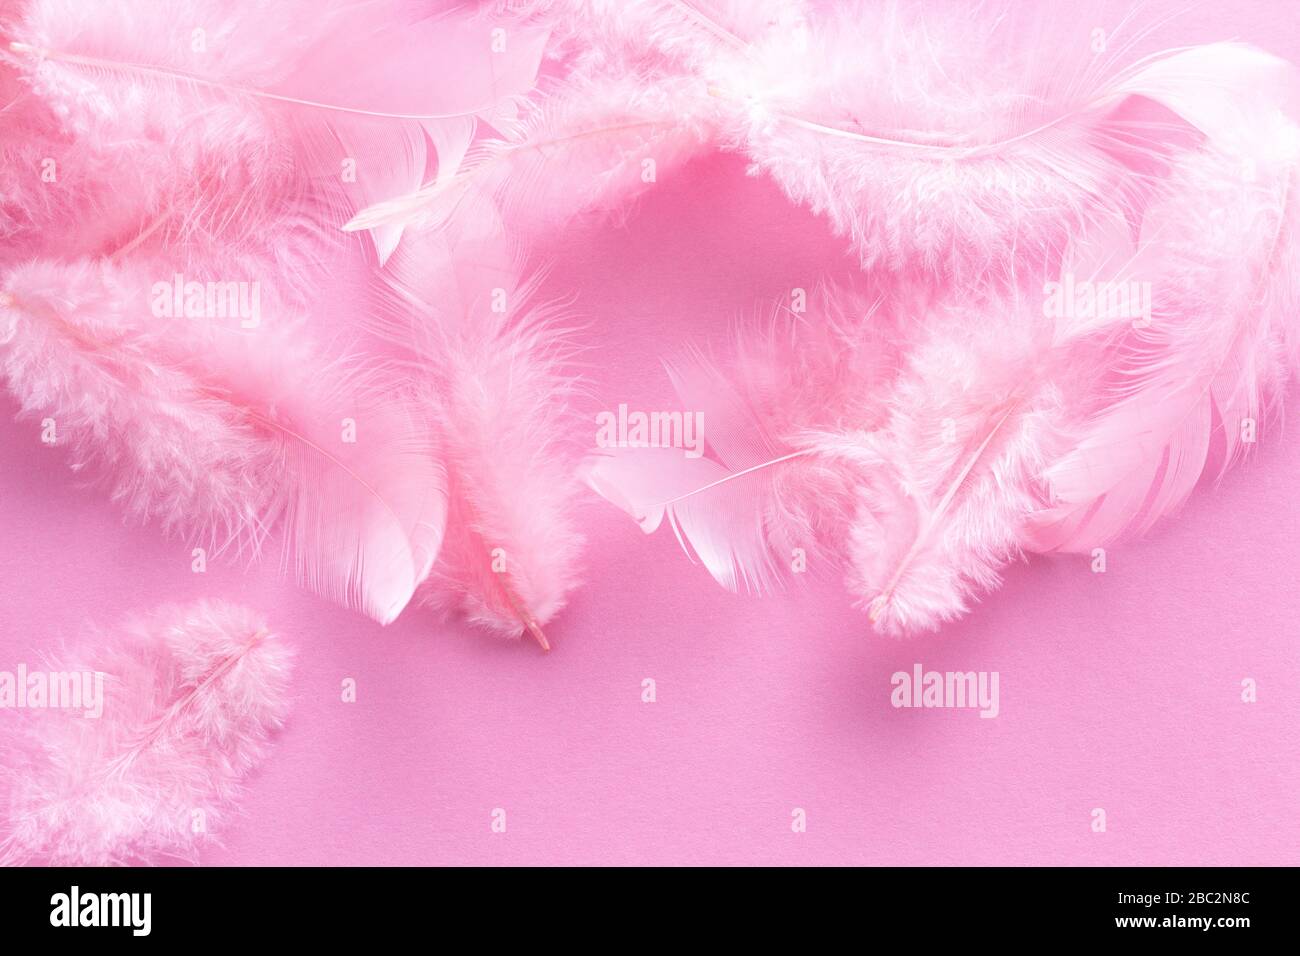 Soft, fluffy coral pink feathers on pastel rose background. Minimalism style. Vintage trend. Feather texture background. Soft and gentle pink feathers Stock Photo